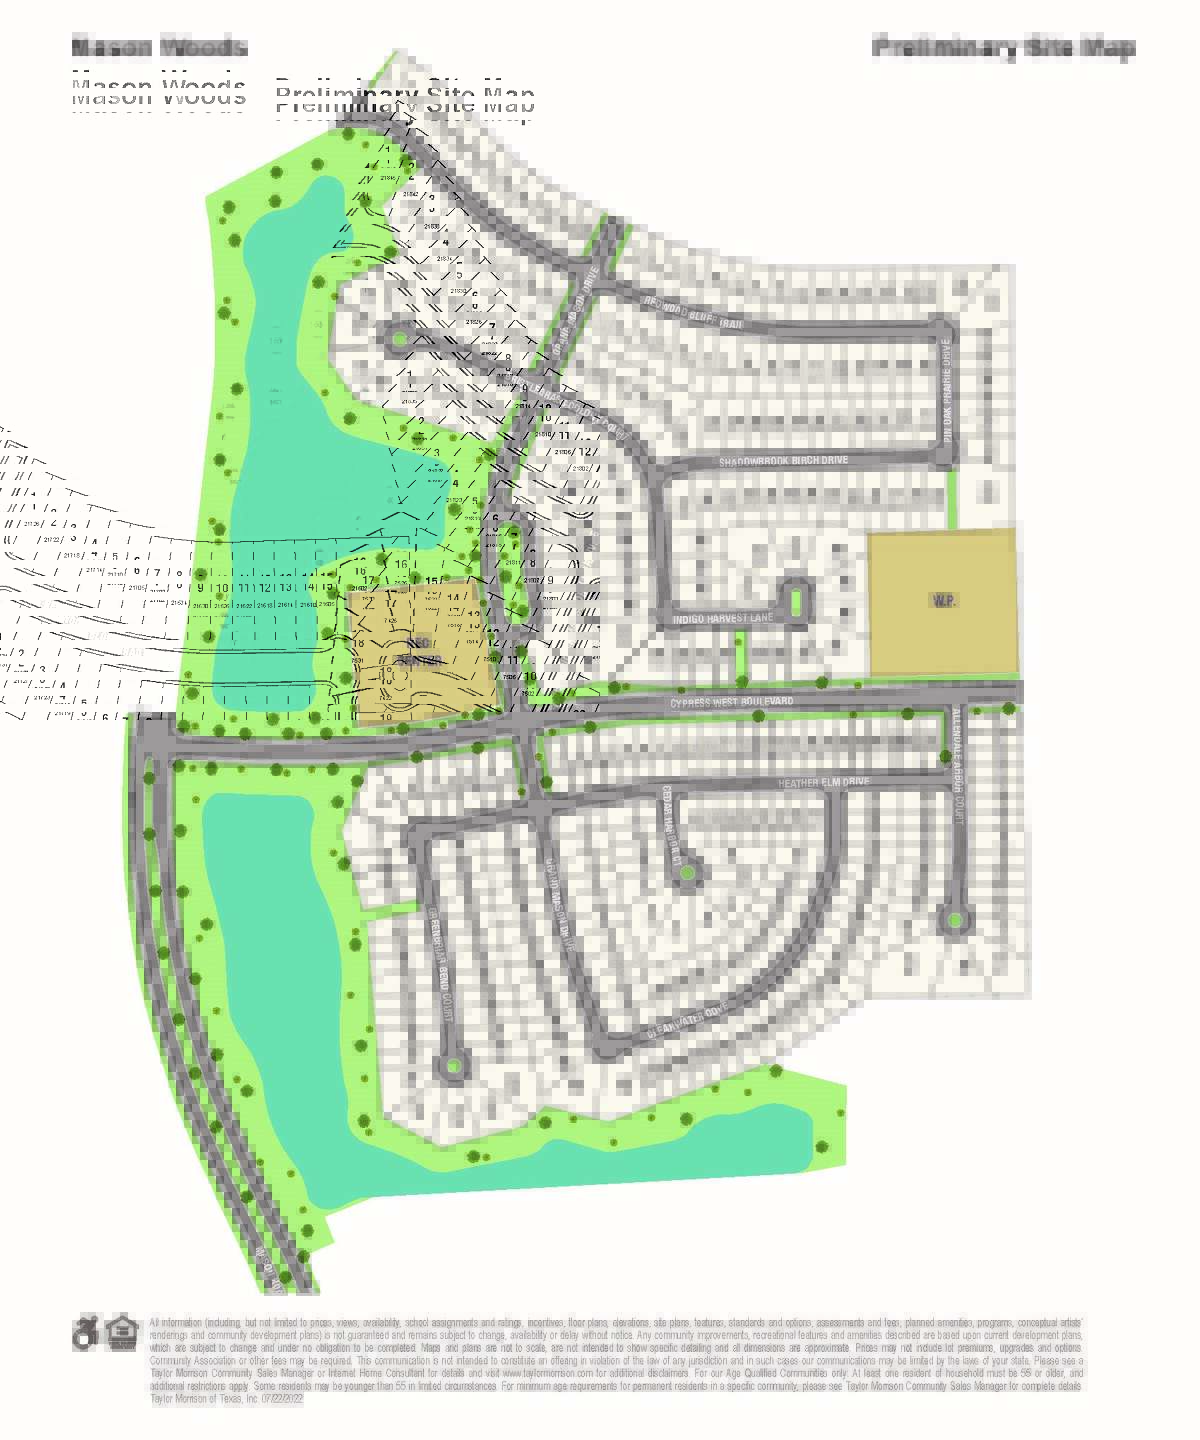 A preliminary site map of the 300-acre Mason Woods near the Grand Parkway and FM 529 in Cypress. The community is planned for more than 1,300 single-family homes.